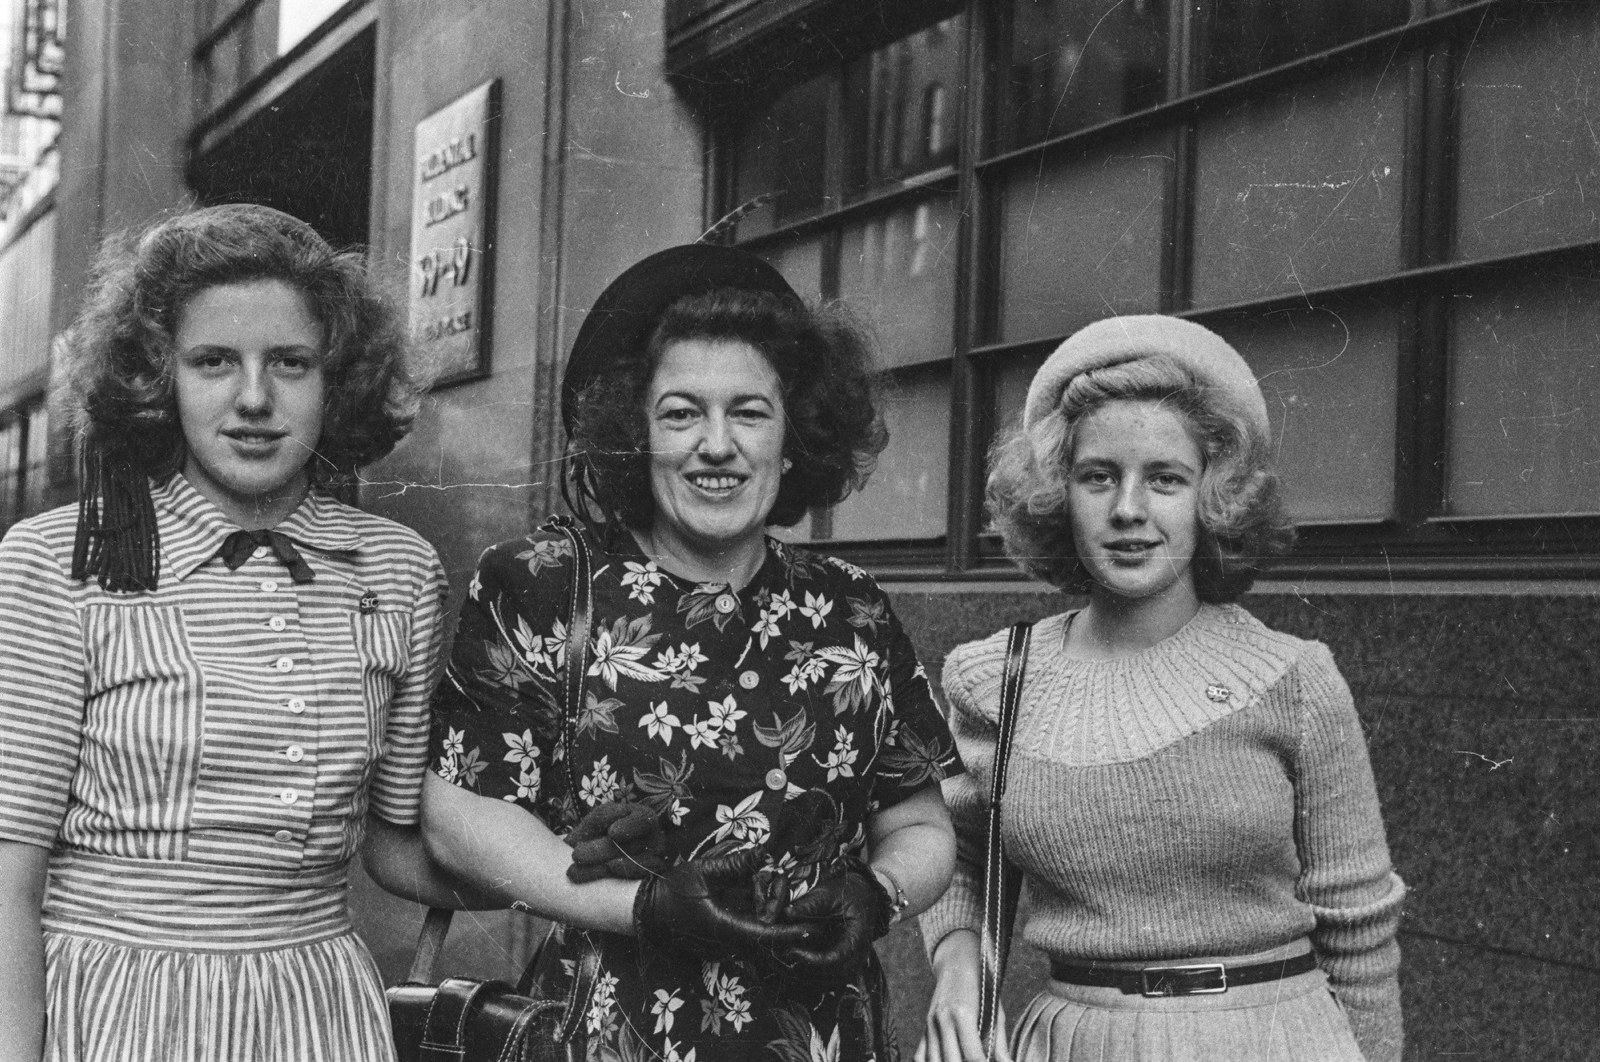 Black and white street photograph of three women linking arms walking down the street.